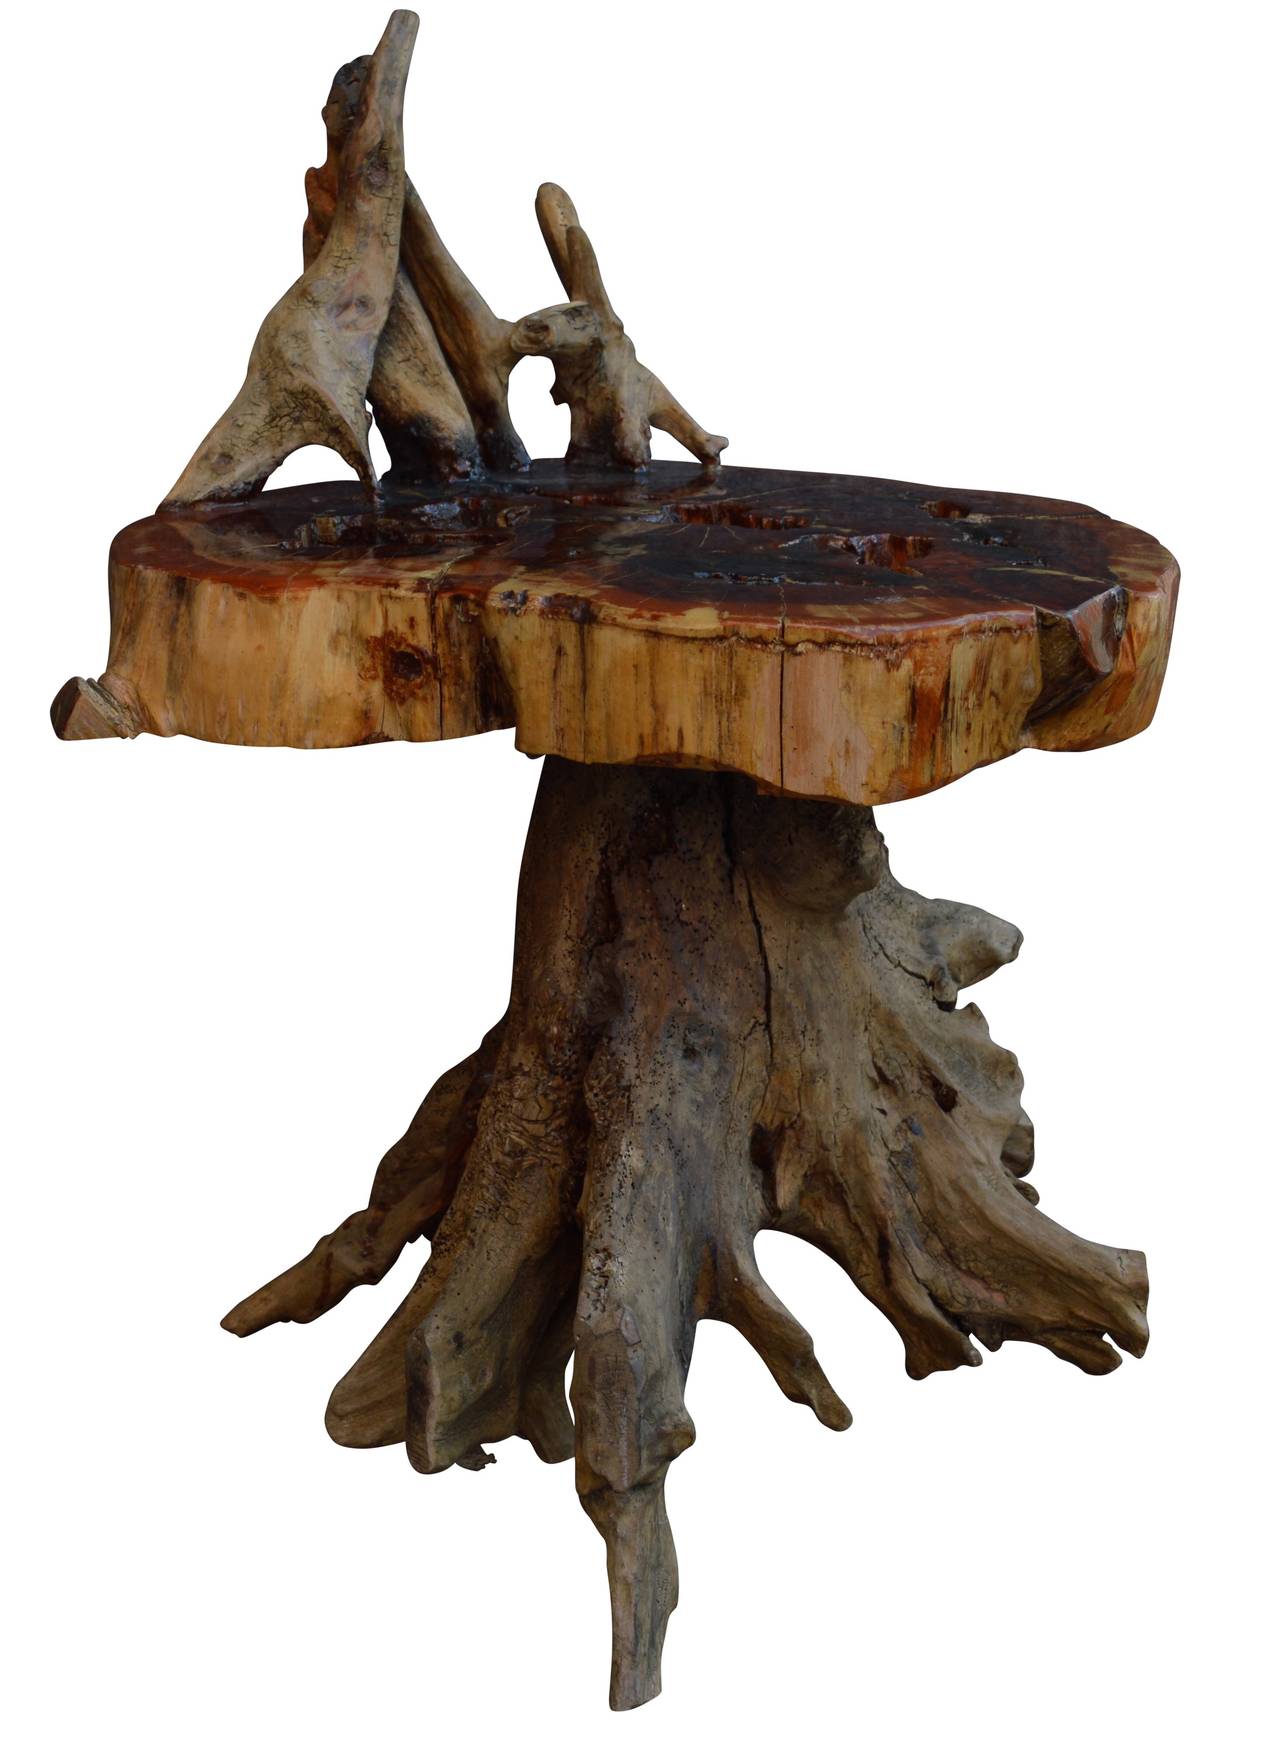 Hand-Crafted Organic Wooden Side Table Or Stool